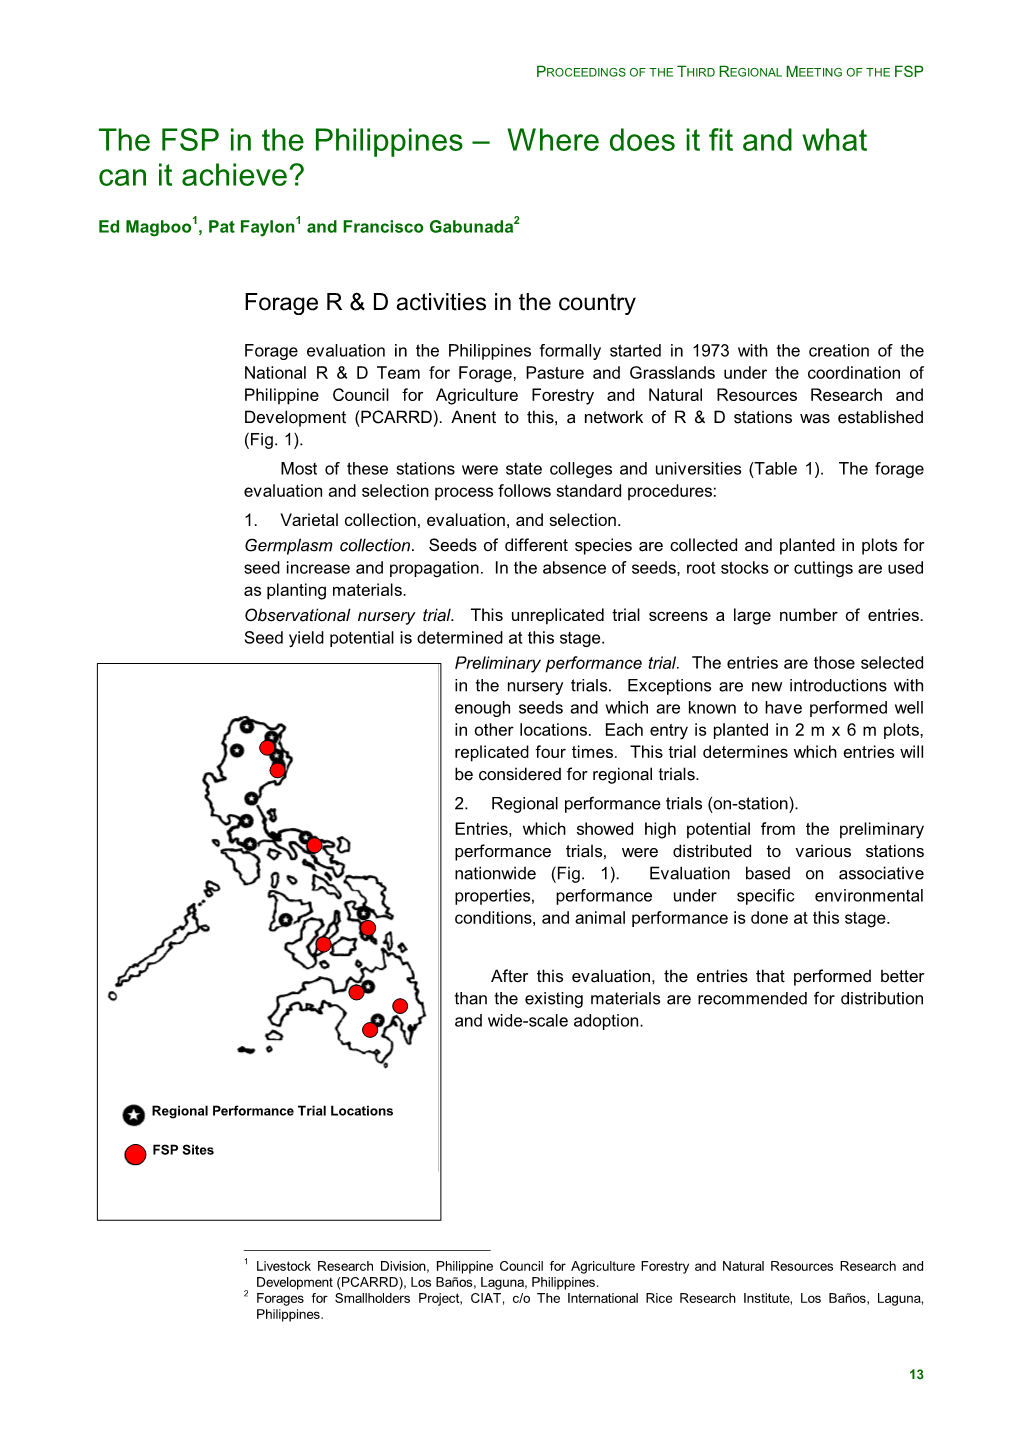 The FSP in the Philippines – Where Does It Fit and What Can It Achieve?